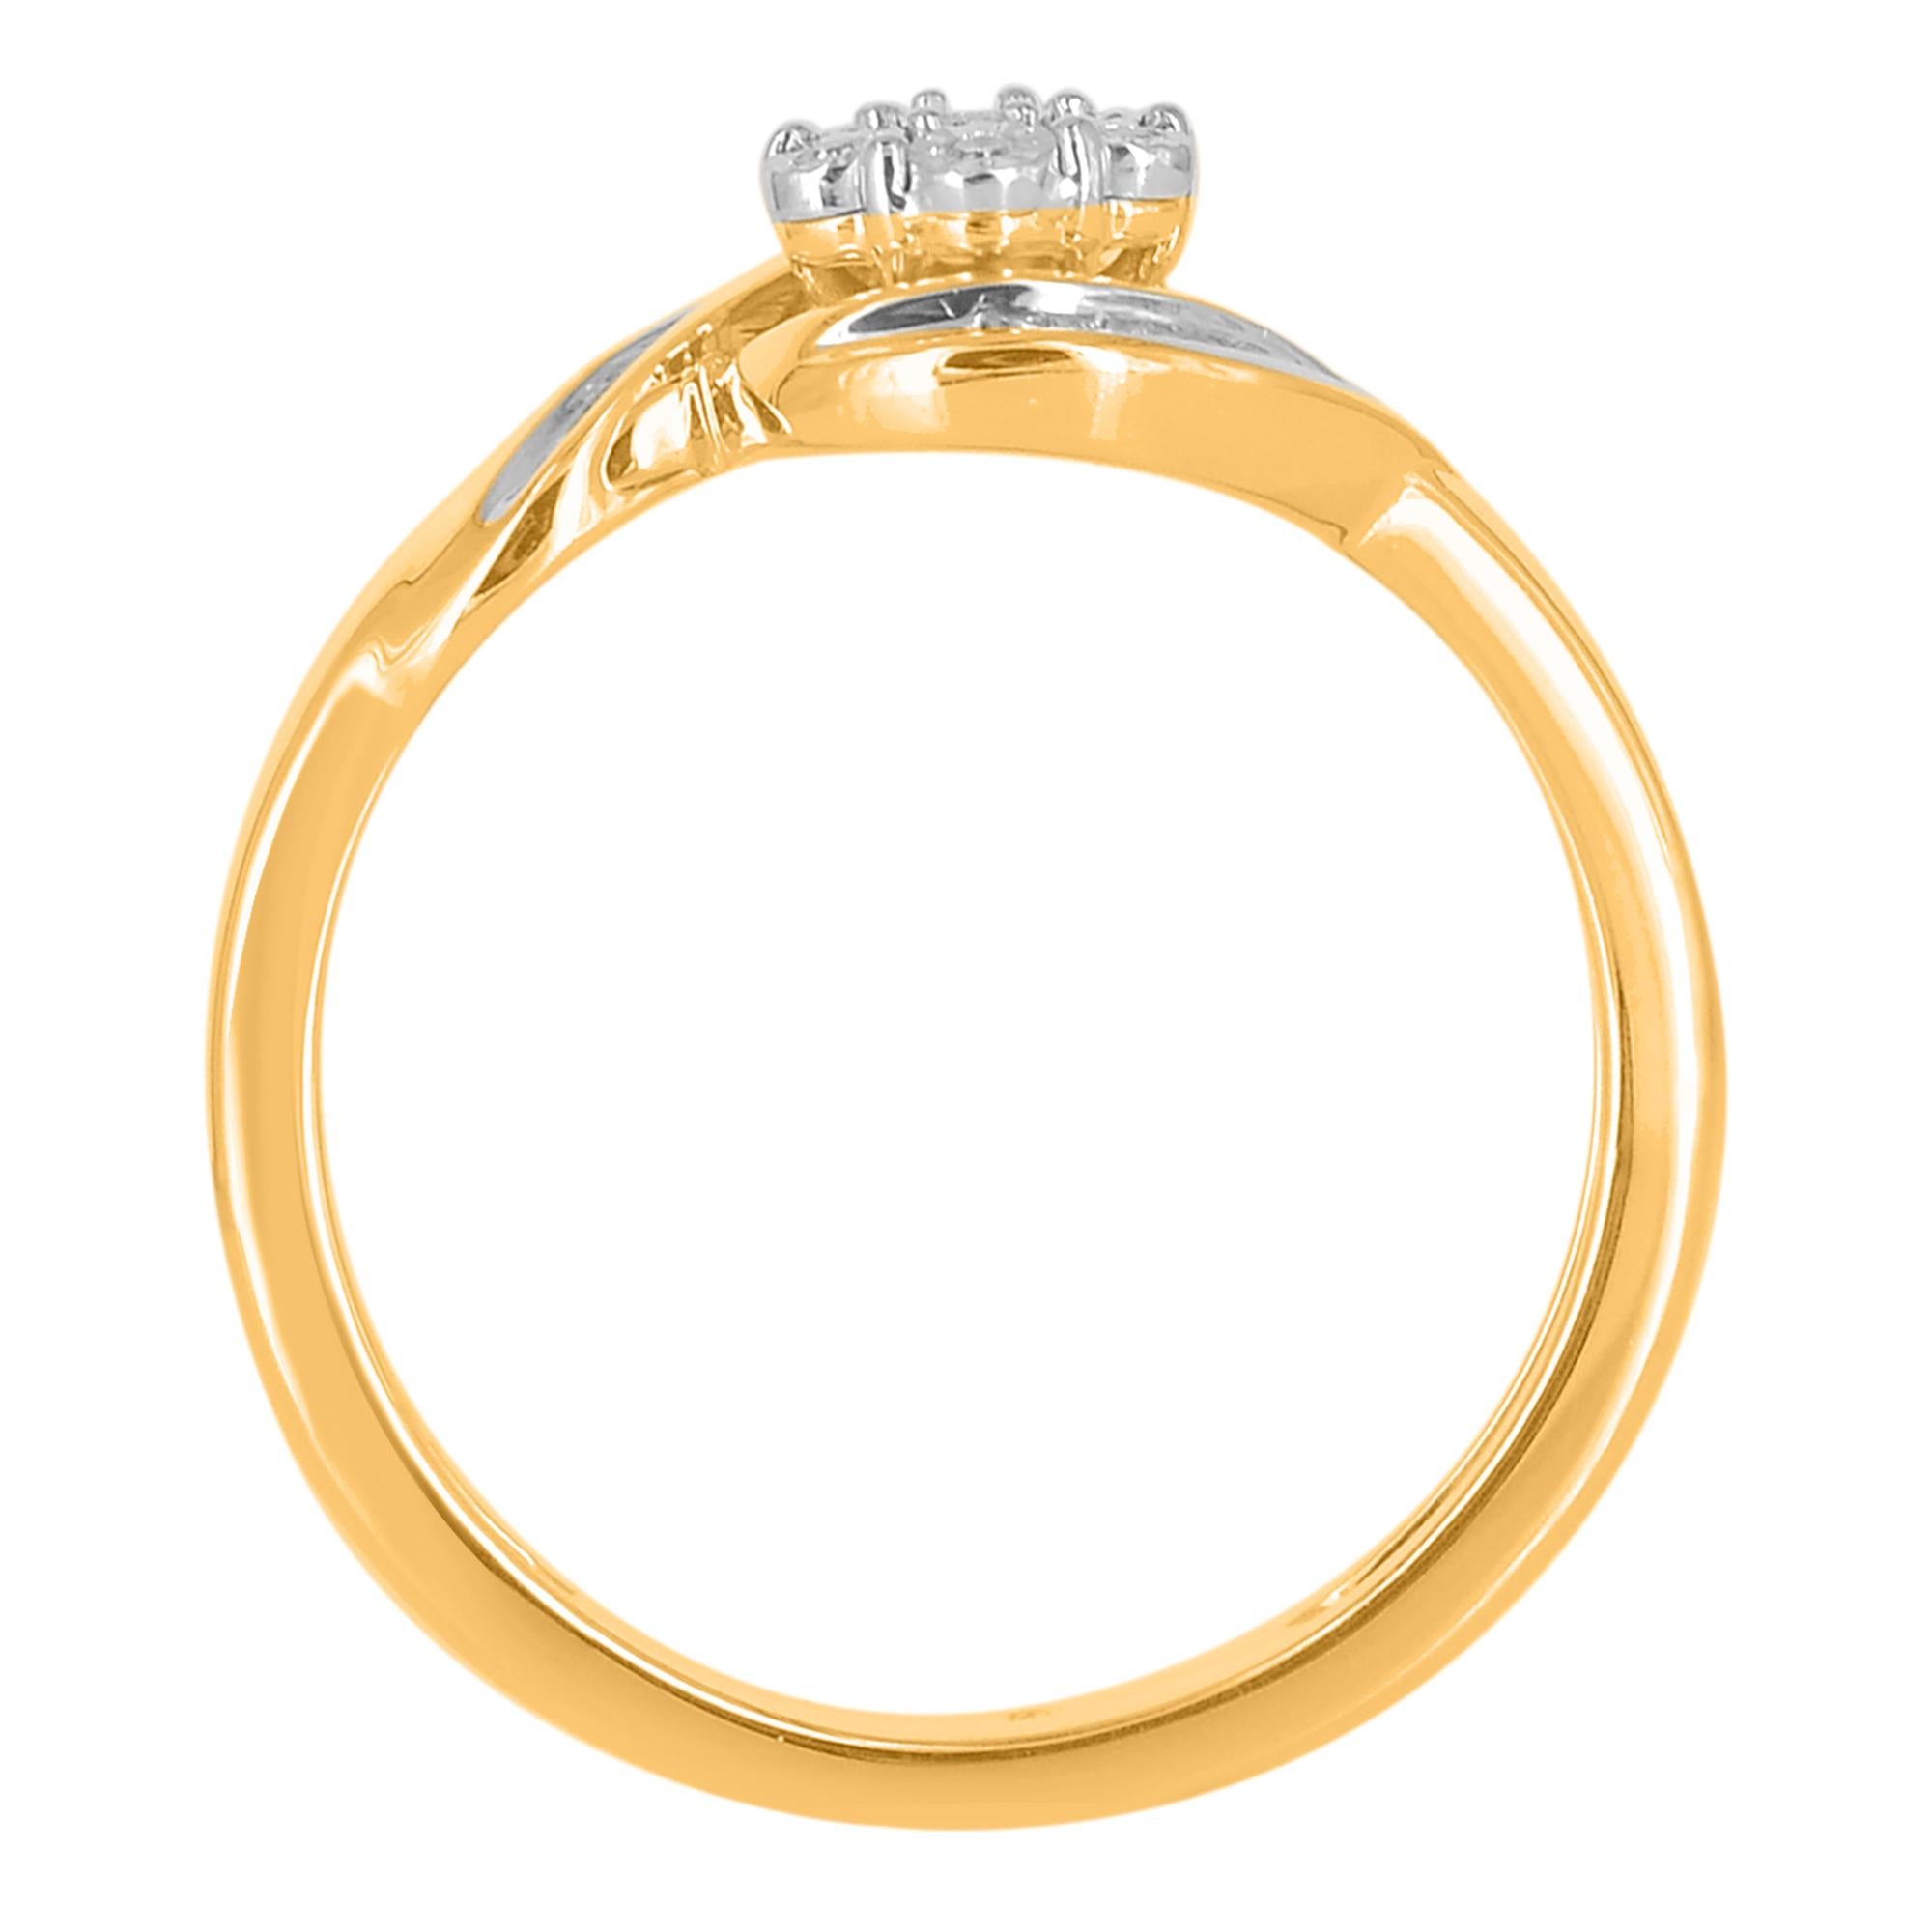 Sure to become an instant favorite, this sparking diamond bypass wedding band celebrates your romance. The ring is crafted from 14-karat gold in your choice of white, rose, or yellow, and features 27 round single cut & baguette cut diamonds, channel